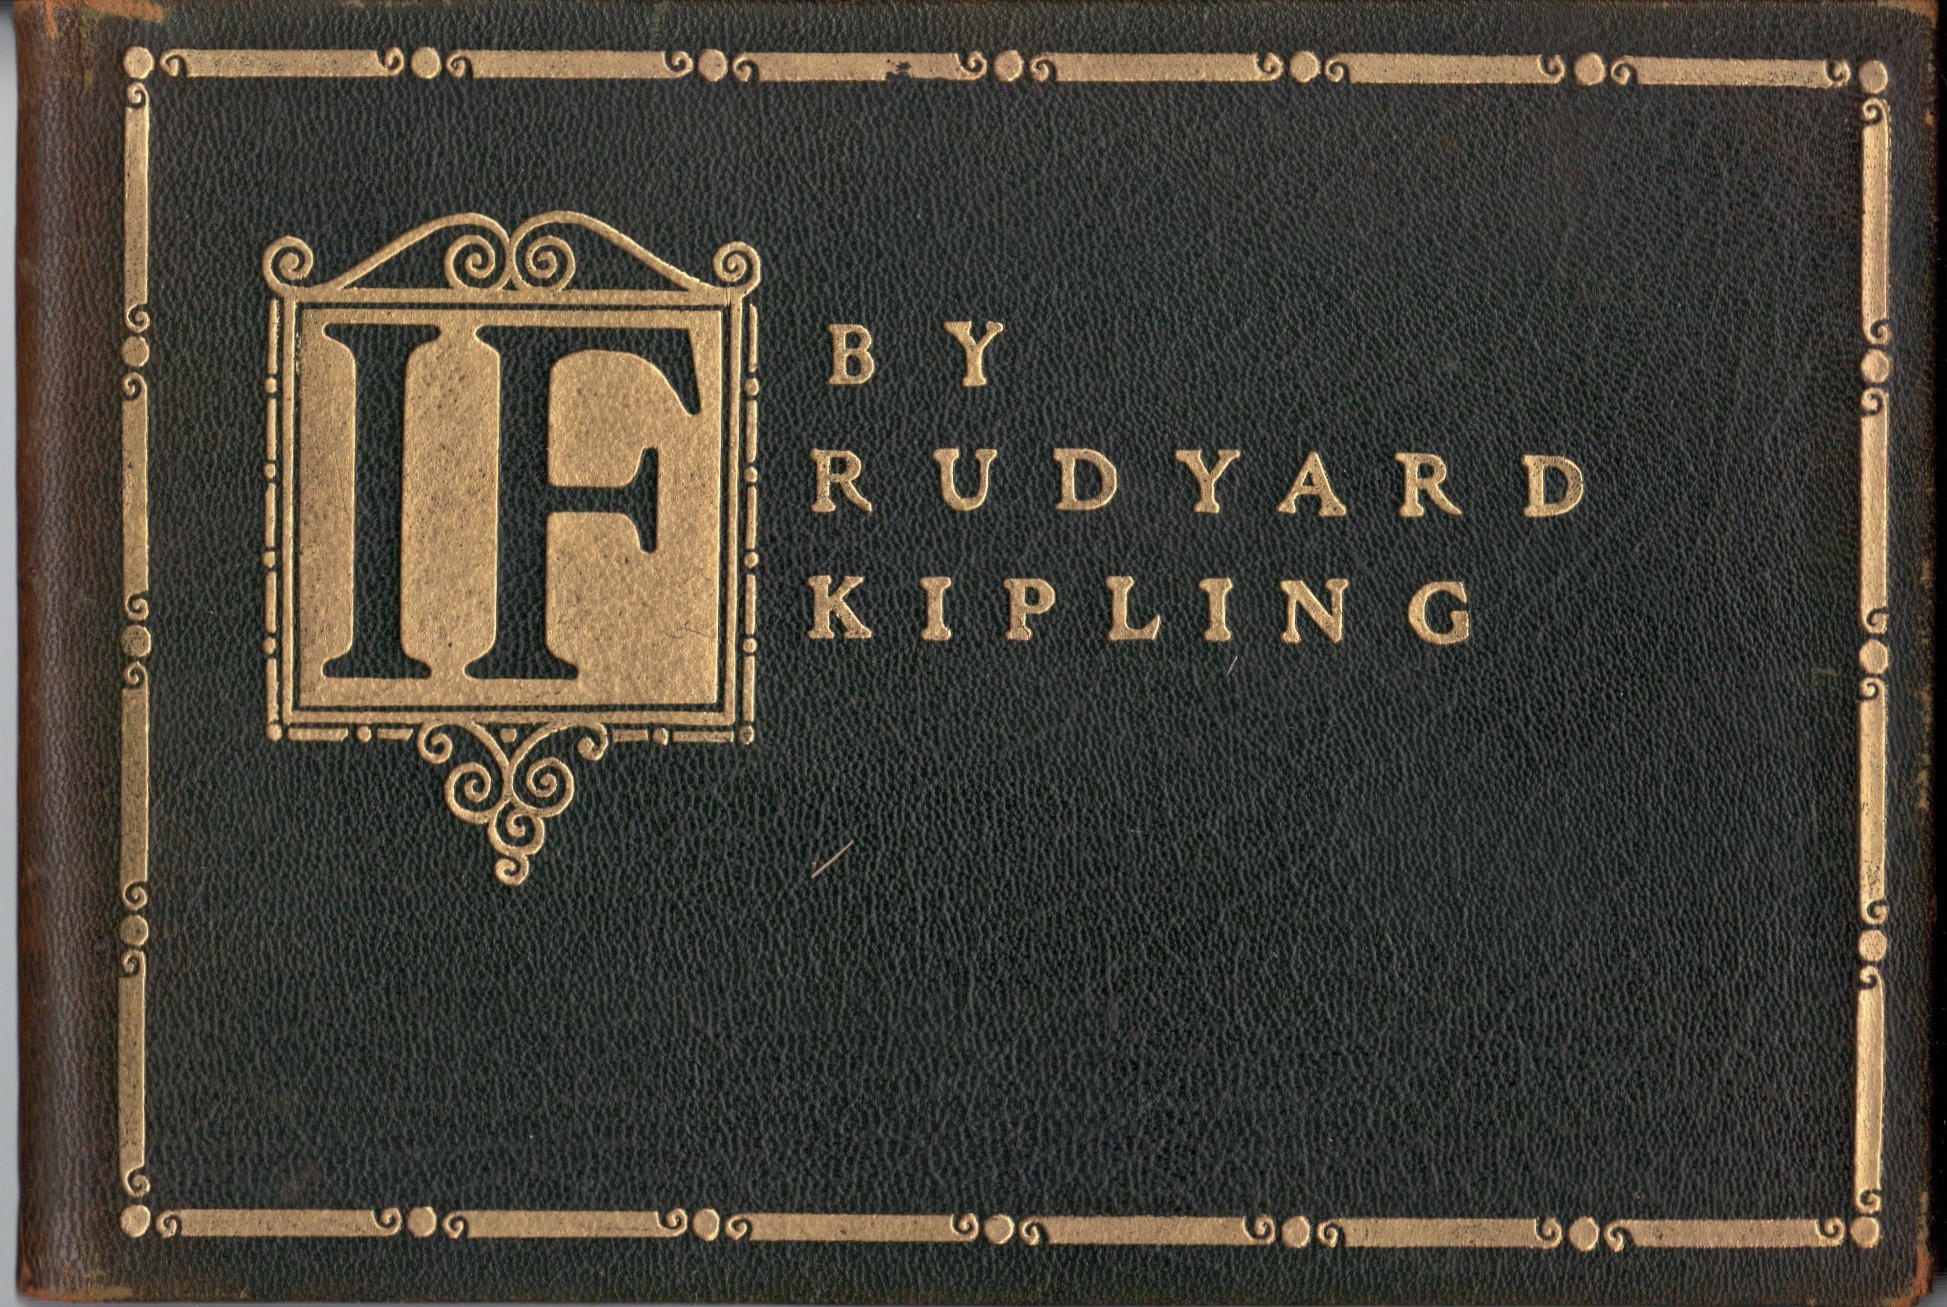 IF-by-Rudyard-Kipling-1910-edition-cover